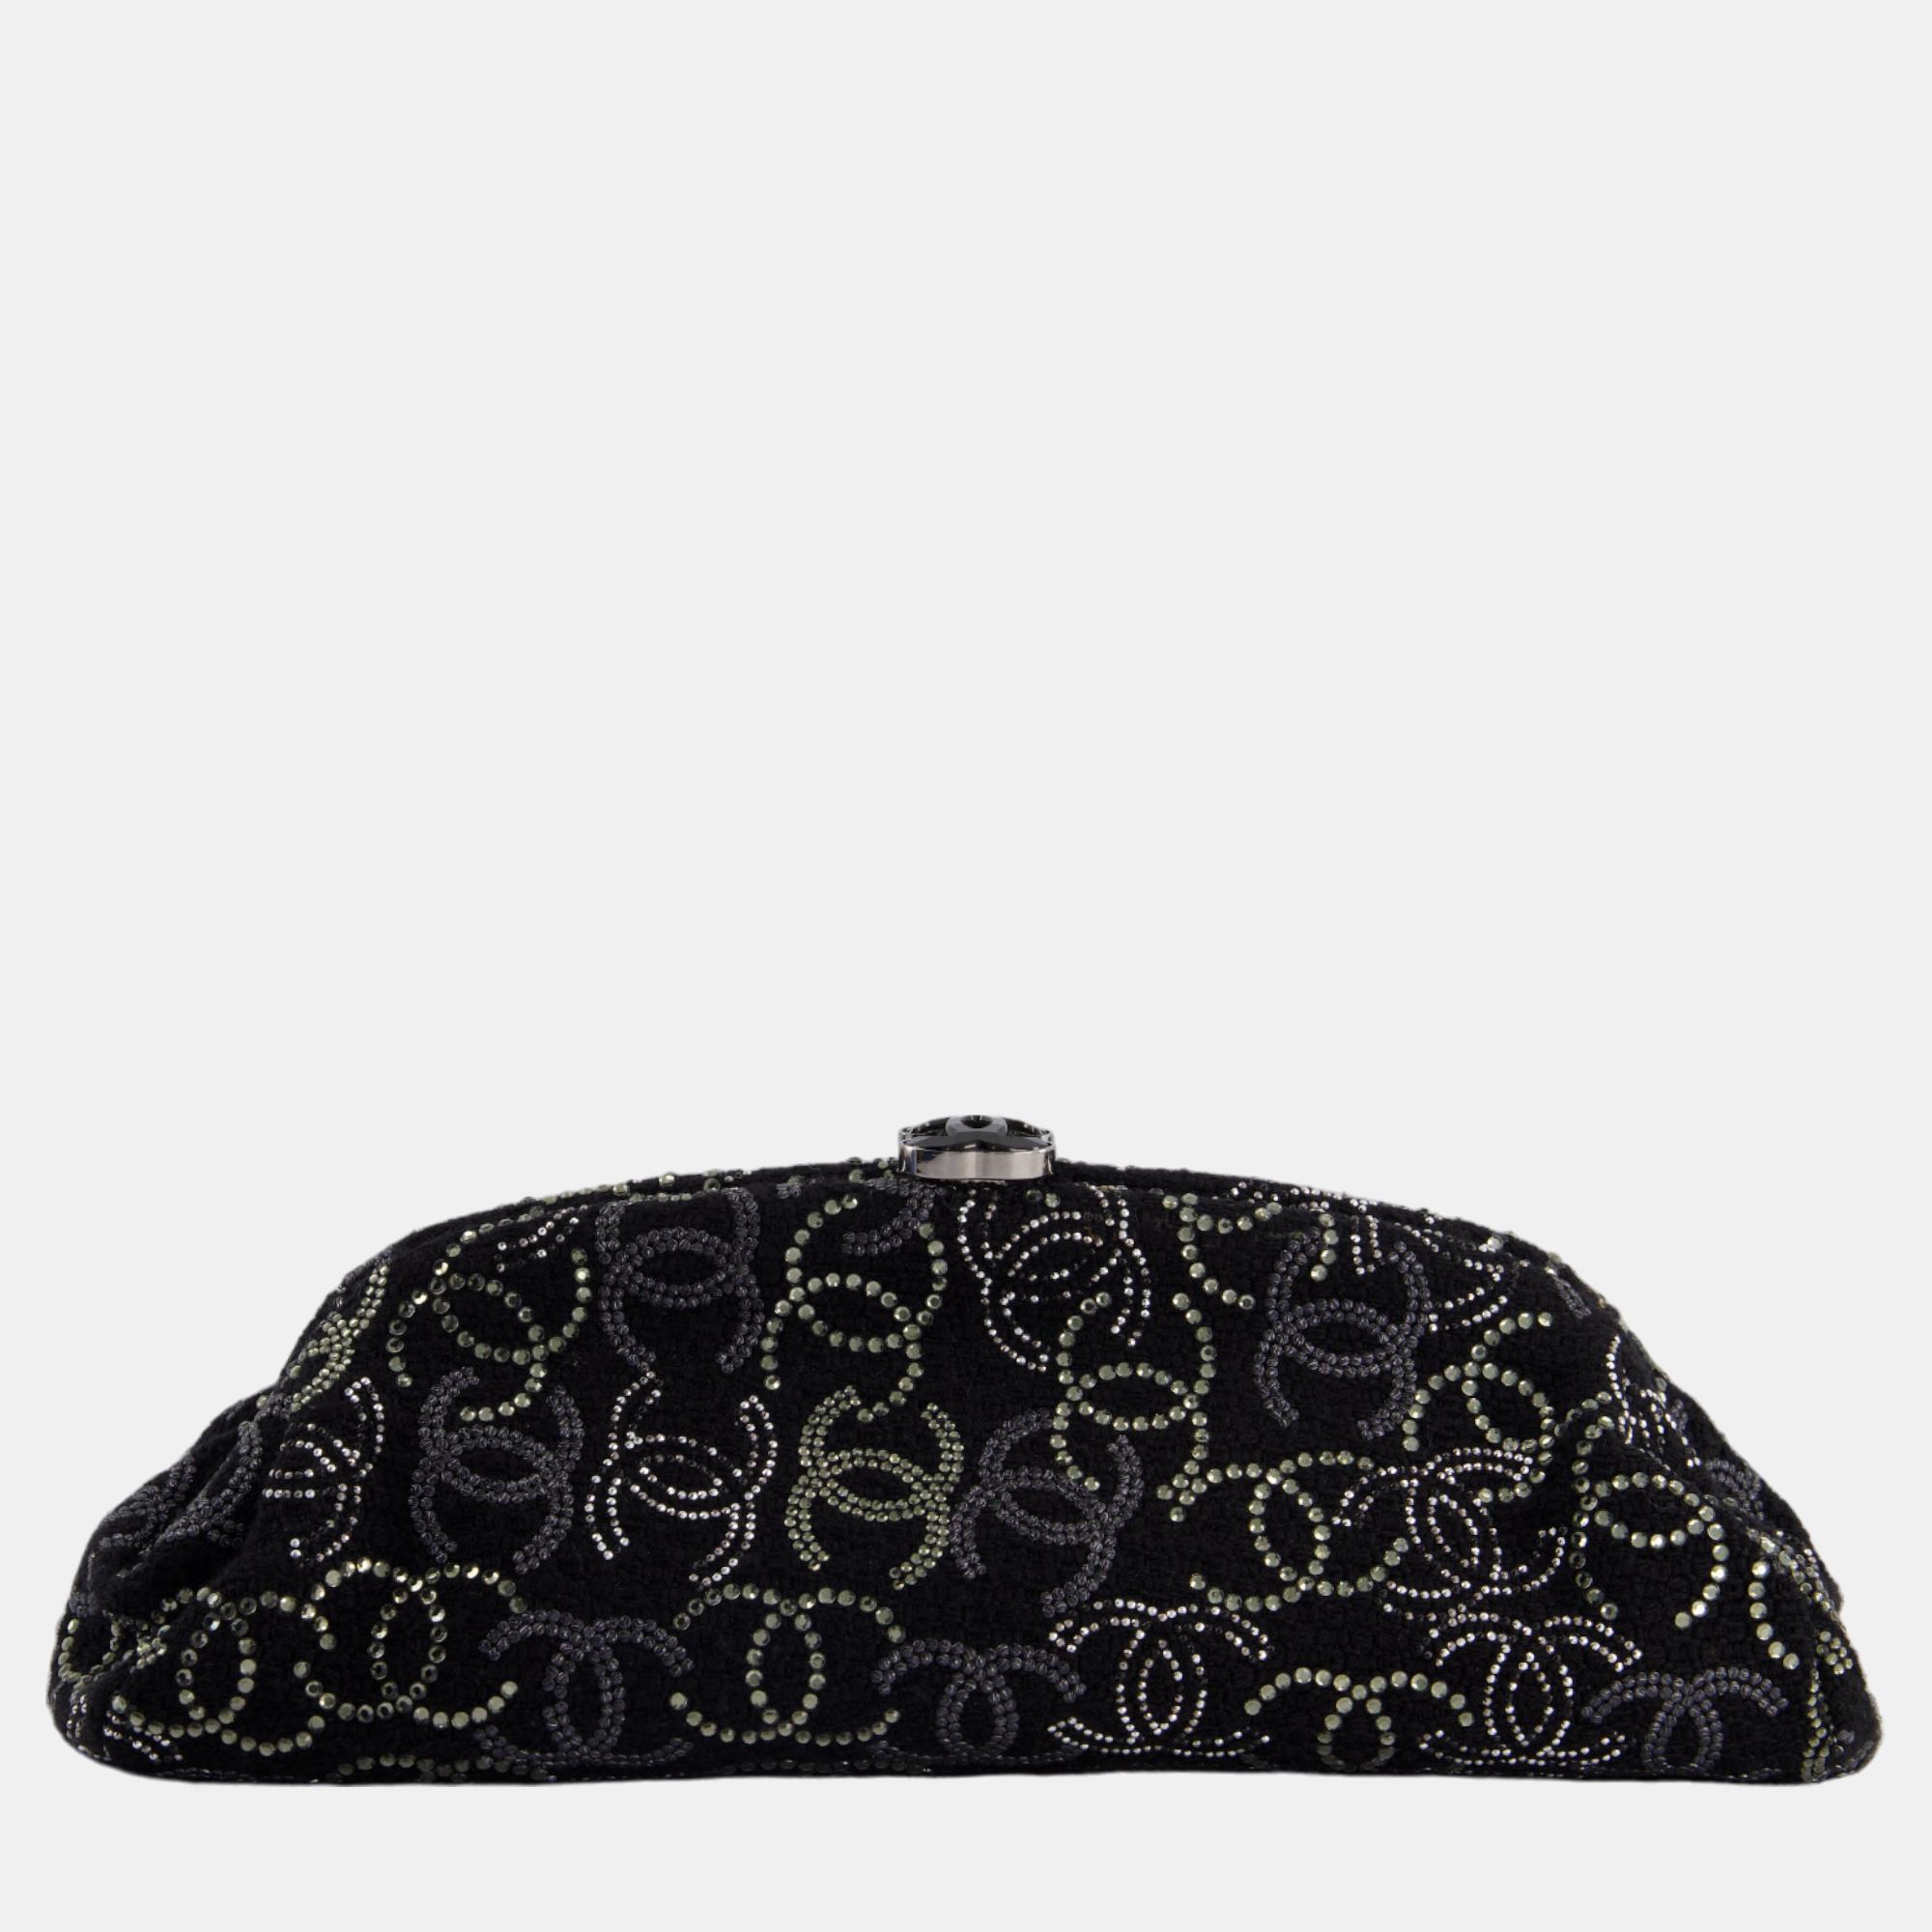 Chanel black timeless clutch bag in fabric with gunmetal hardware and crystal logo details